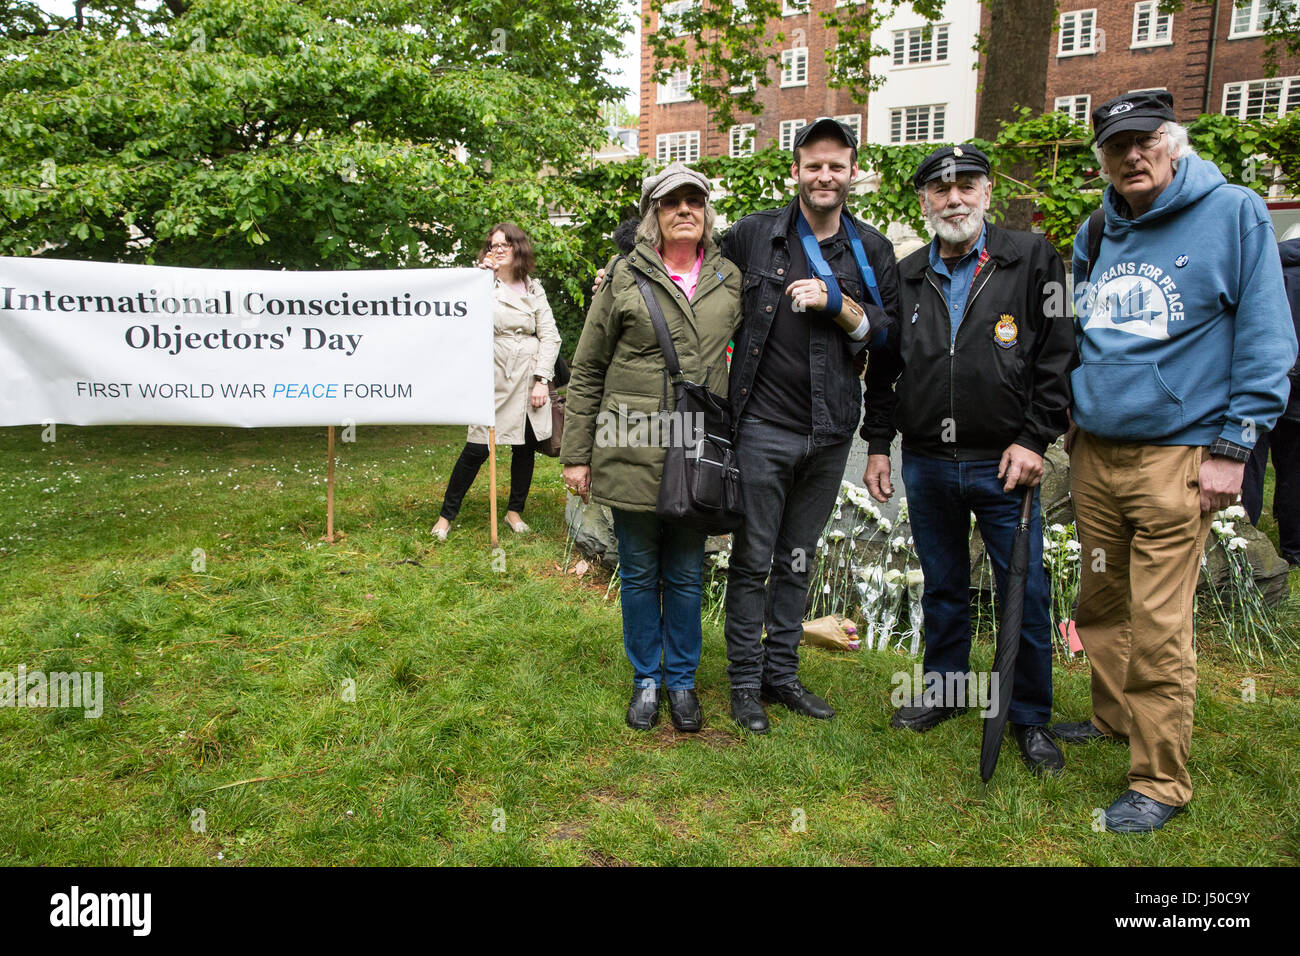 London, UK. 15th May, 2017. Members of Veterans of Peace including Ben Griffin and Jim Radford attend a ceremony in honour of conscientious objectors past and present in front of the Conscientious Objectors' stone in Tavistock Square on Conscientious Objectors' Day. Credit: Mark Kerrison/Alamy Live News Stock Photo